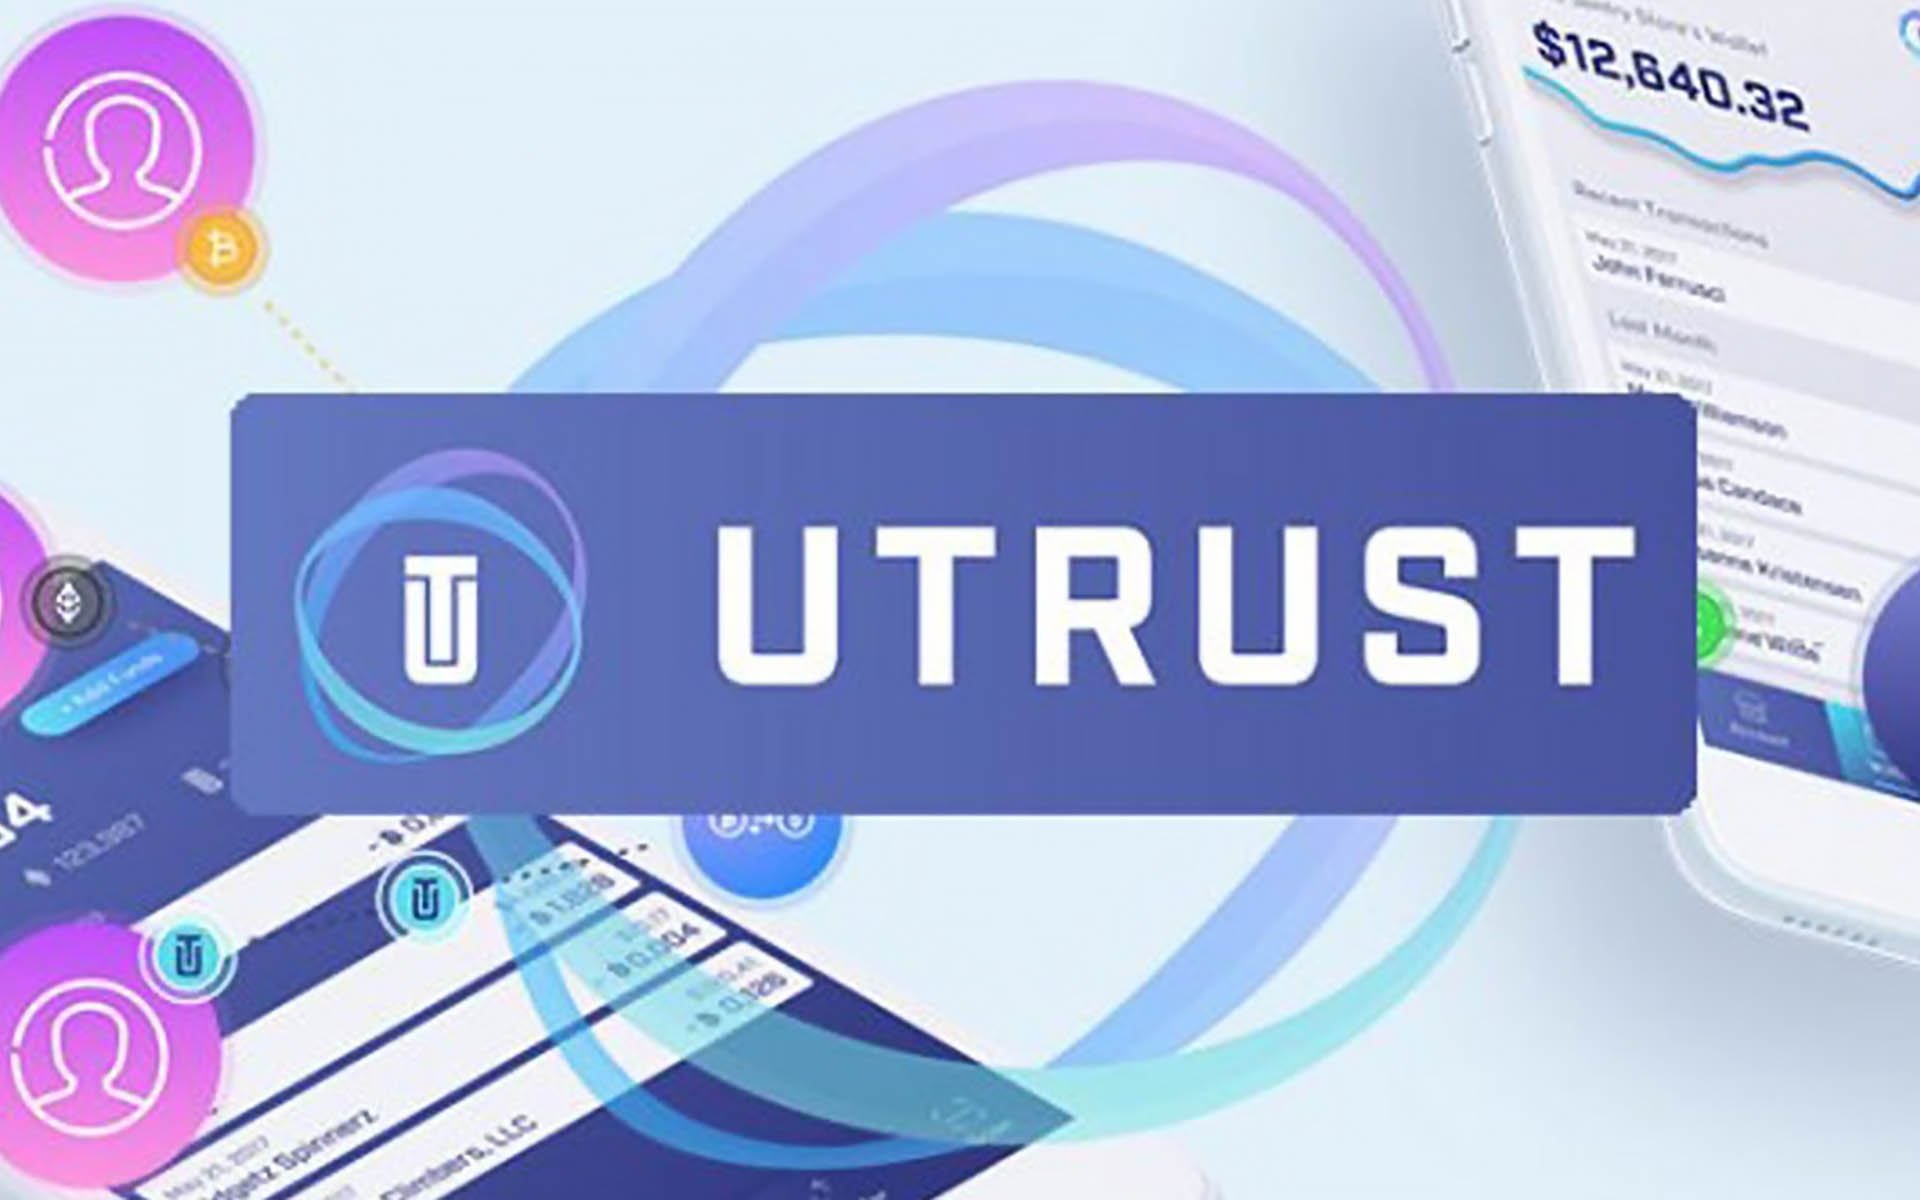 UTRUST are Promoting a Cryptocurrency Payment Solution to 2.5 Billion ‘Unbanked’ People, Announcing ICO Details